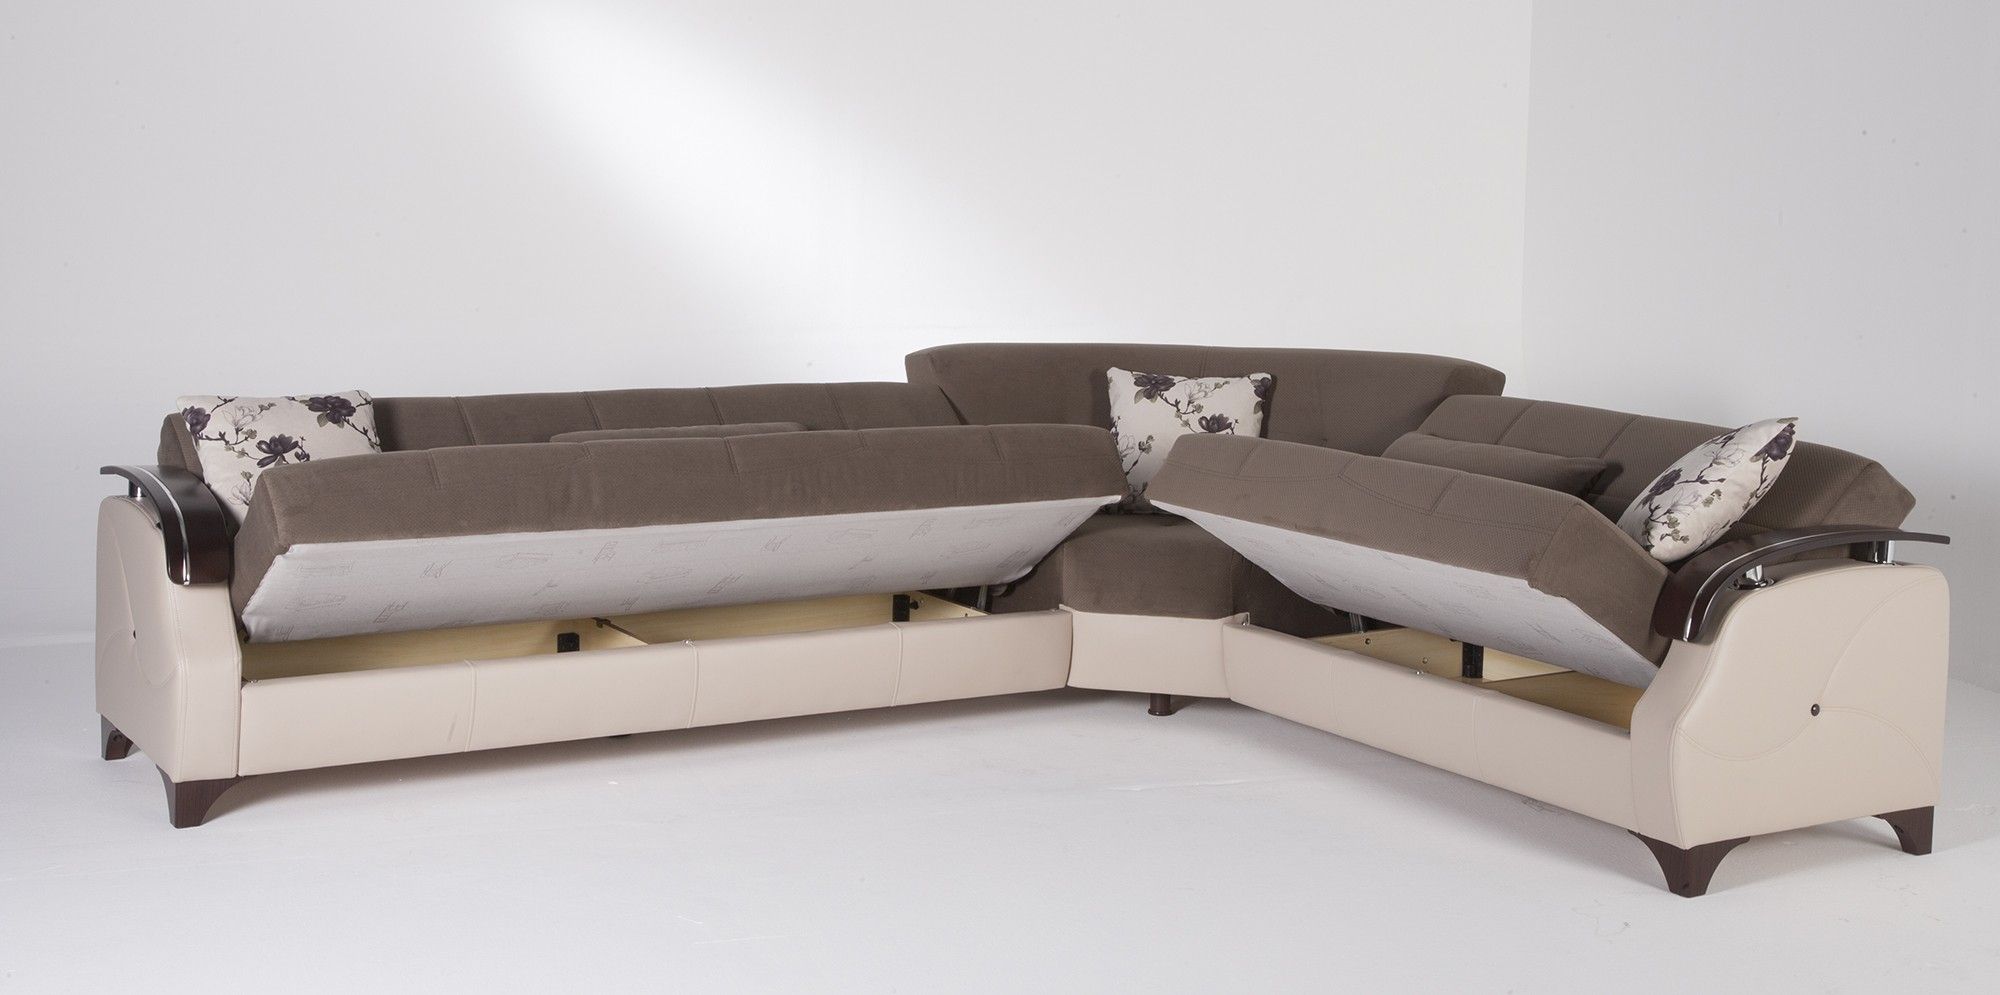 Charming Sectional Sofas Ct 42 For Your Eco Friendly Sectional Intended For Eco Friendly Sectional Sofa (View 10 of 12)